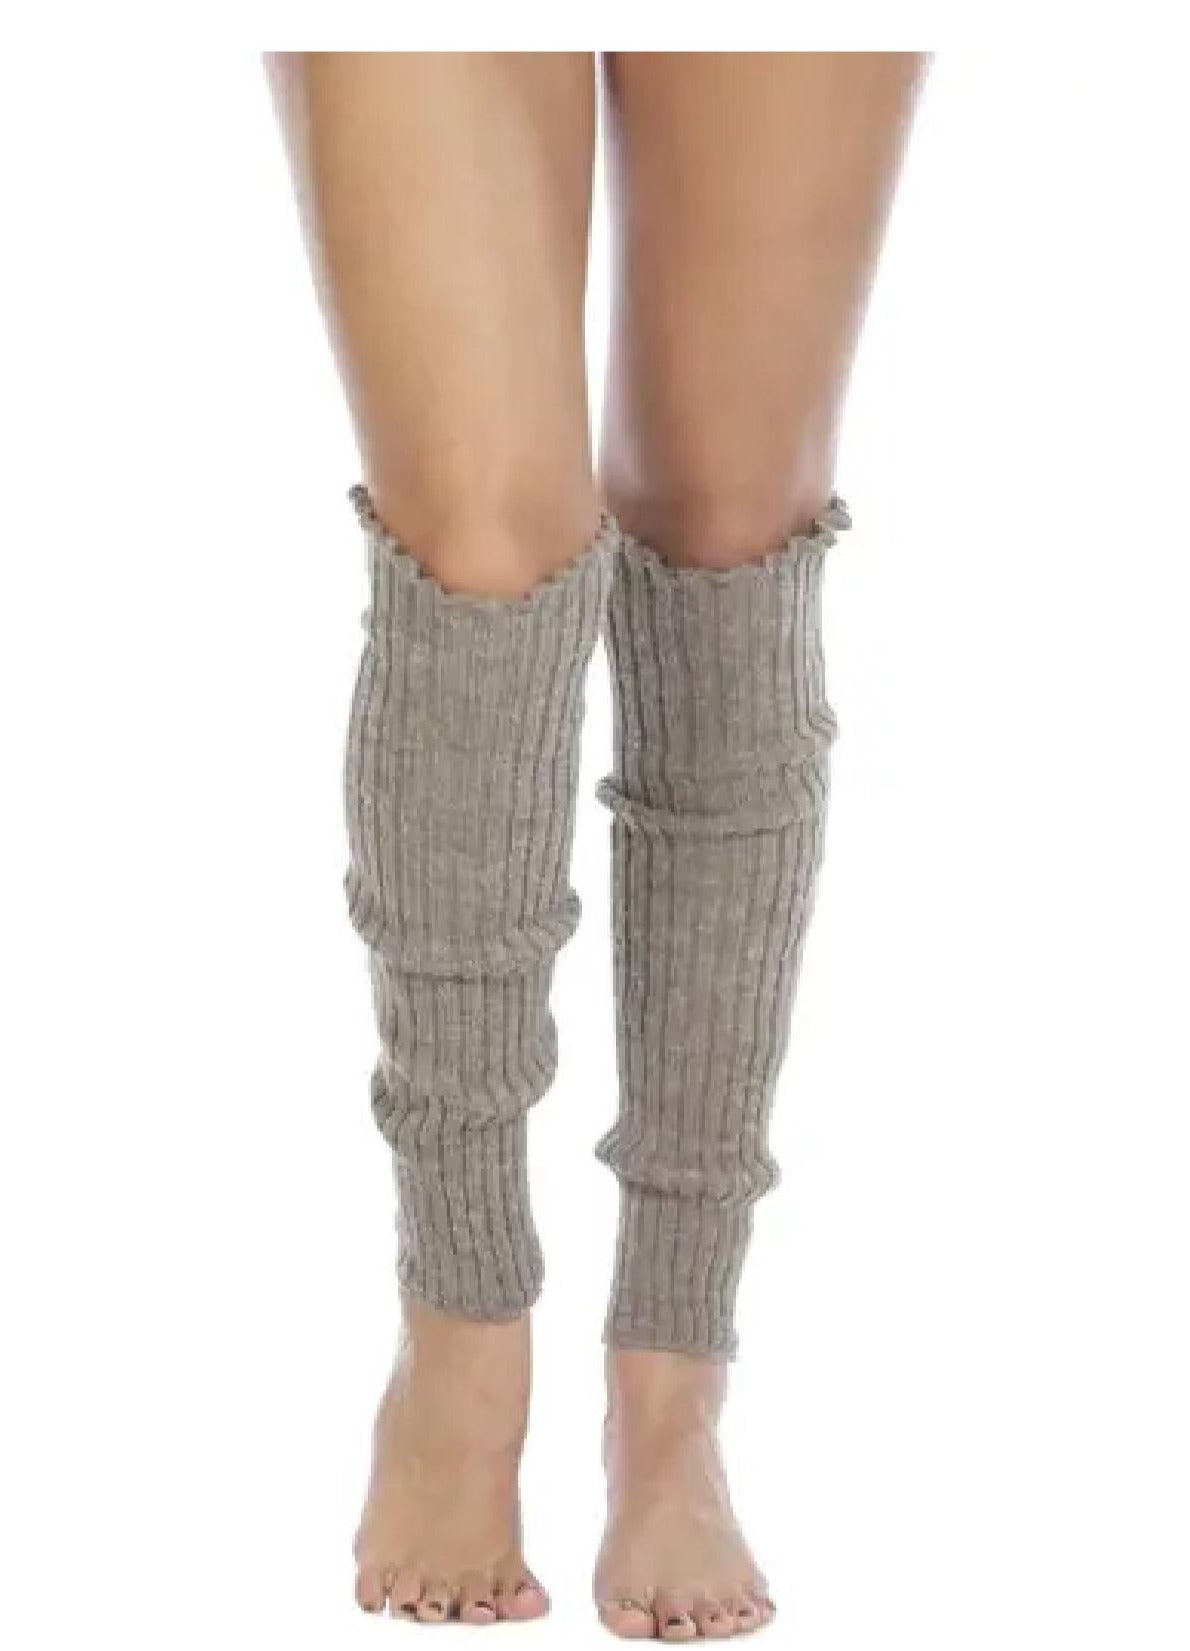 Leg Warmers: Cable Knit 22"